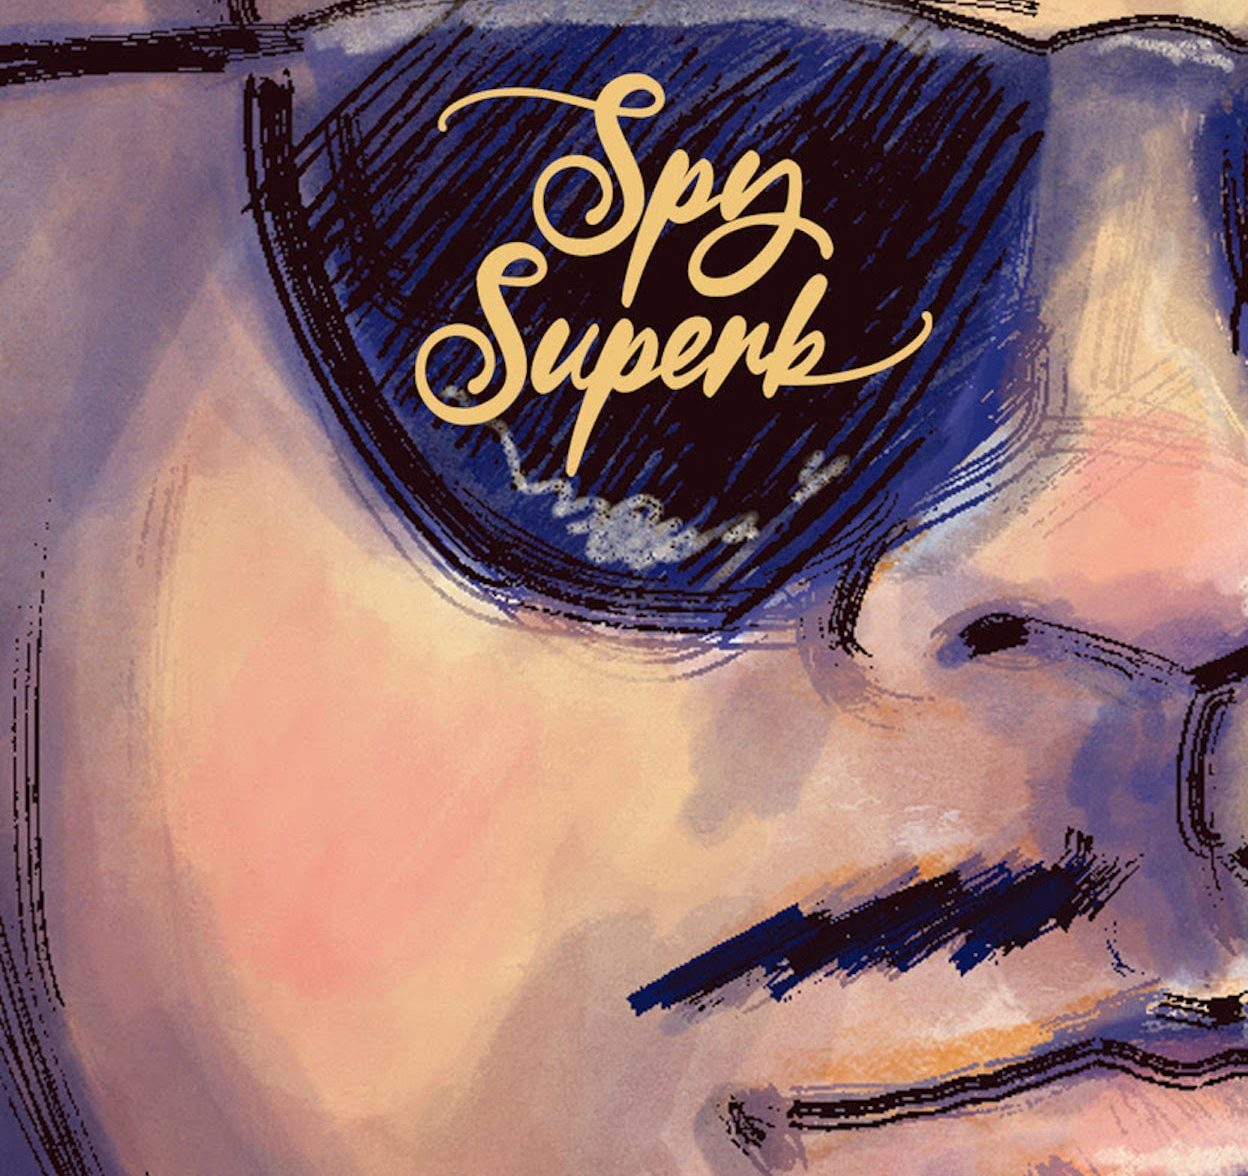 Mystery-thriller 'Spy Superb' sneaks into comic shops January 2023